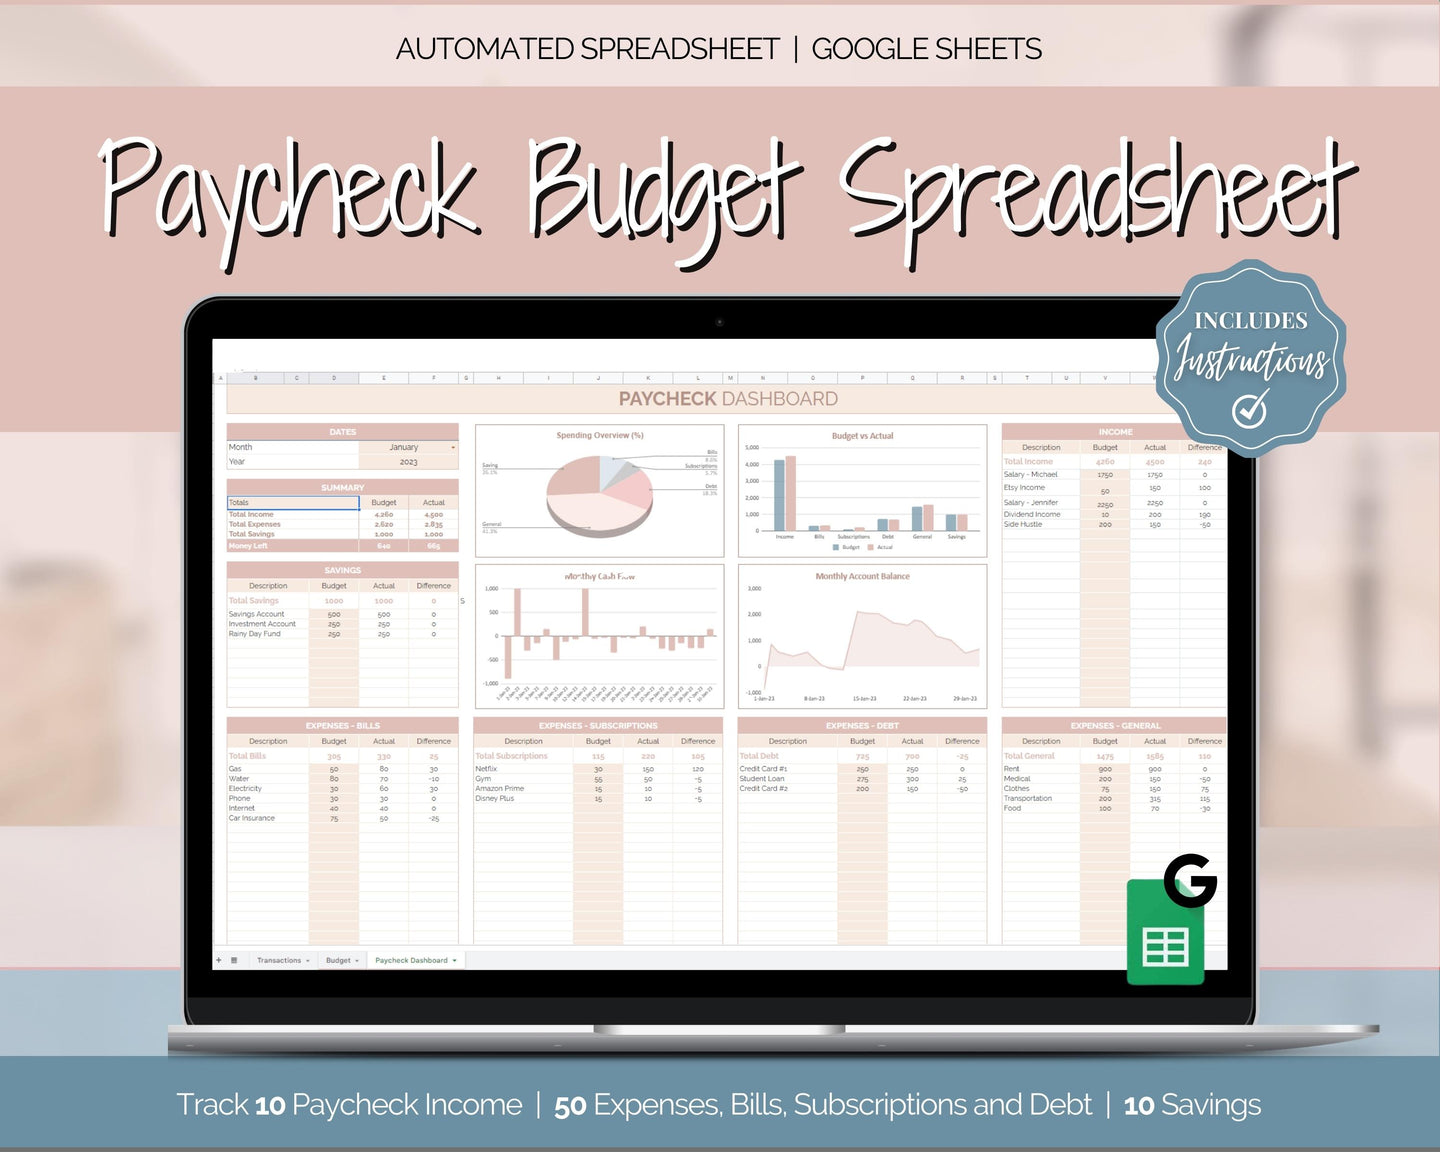 Budget by Paycheck Google Sheets Spreadsheet | Biweekly Zero Based Budget Tracker | Brown